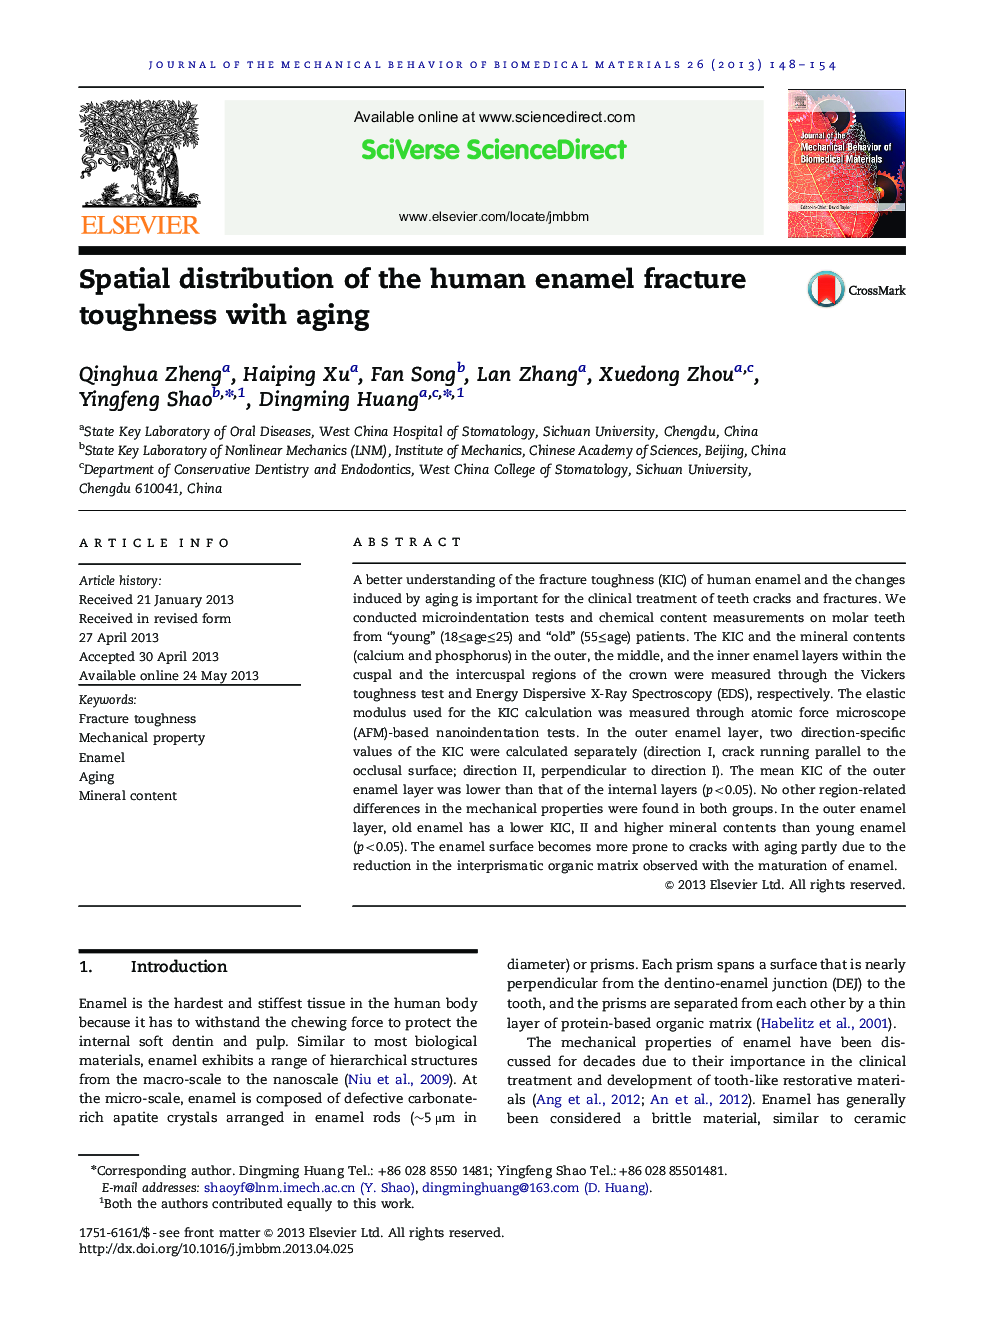 Spatial distribution of the human enamel fracture toughness with aging